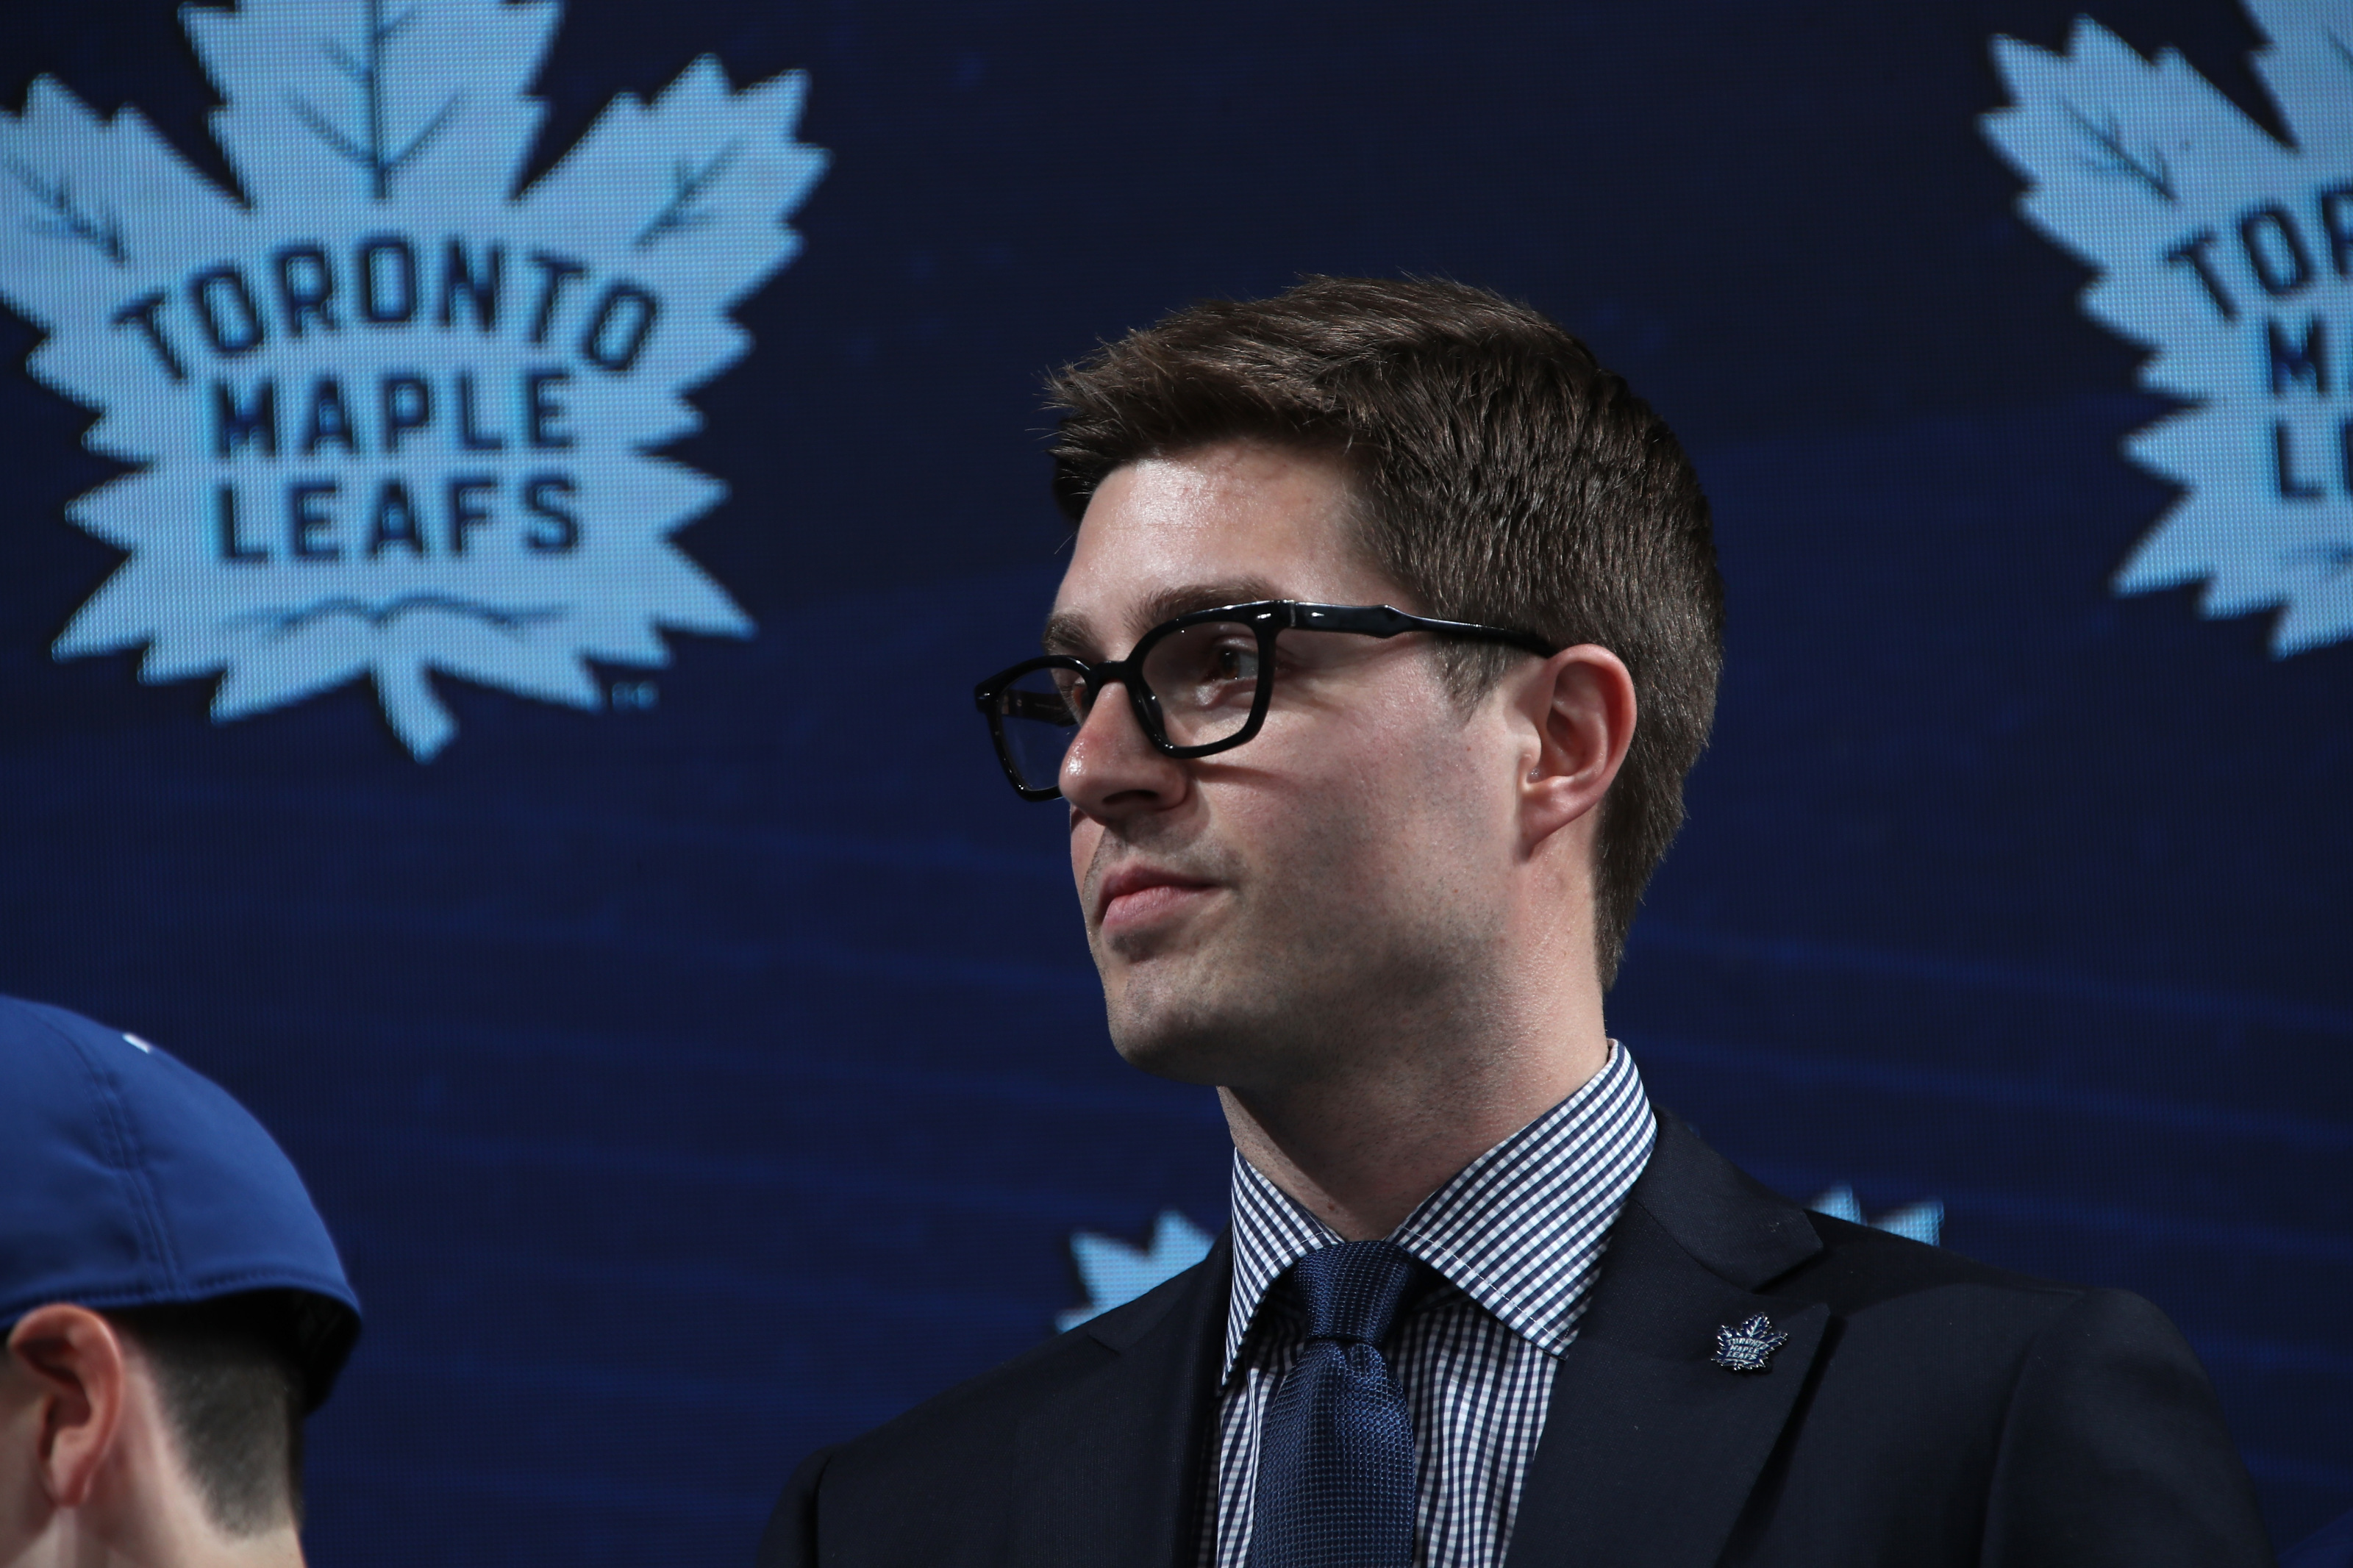 Kyle Dubas out as GM of the Toronto Maple Leafs after 5 seasons